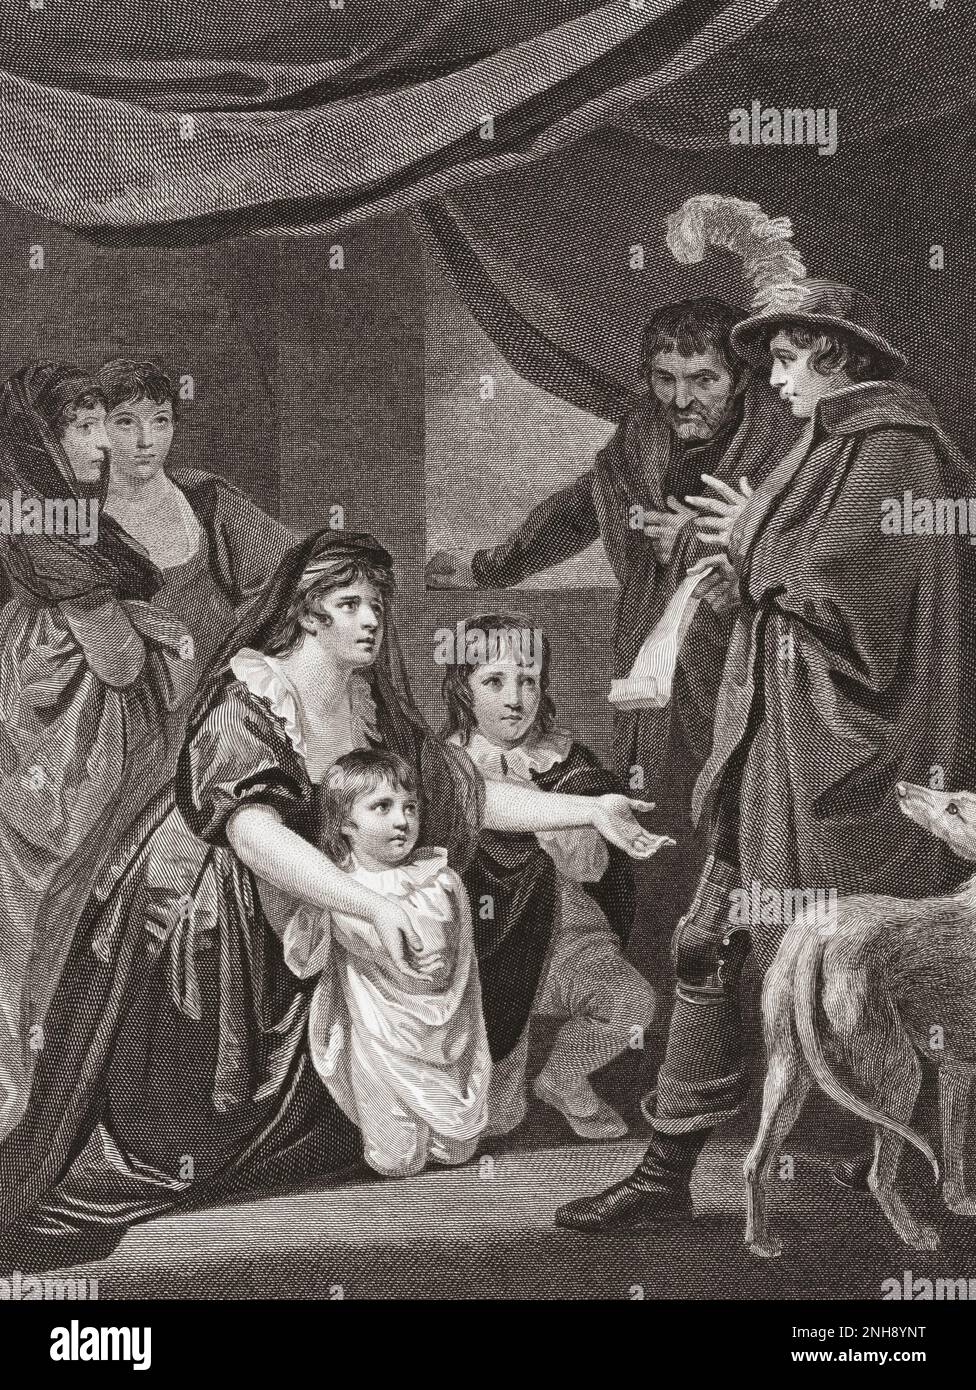 Lady Elizabeth Grey entreating King Edward IV to protect her children.  Elizabeth Woodville, later known as Elizabeth Grey, was Queen of England from her marriage to Edward IV. After a print by William Bromley from the work by John Opie originally featured in Robert Bowyer's Historic Gallery, published between 1793 and 1806. Stock Photo